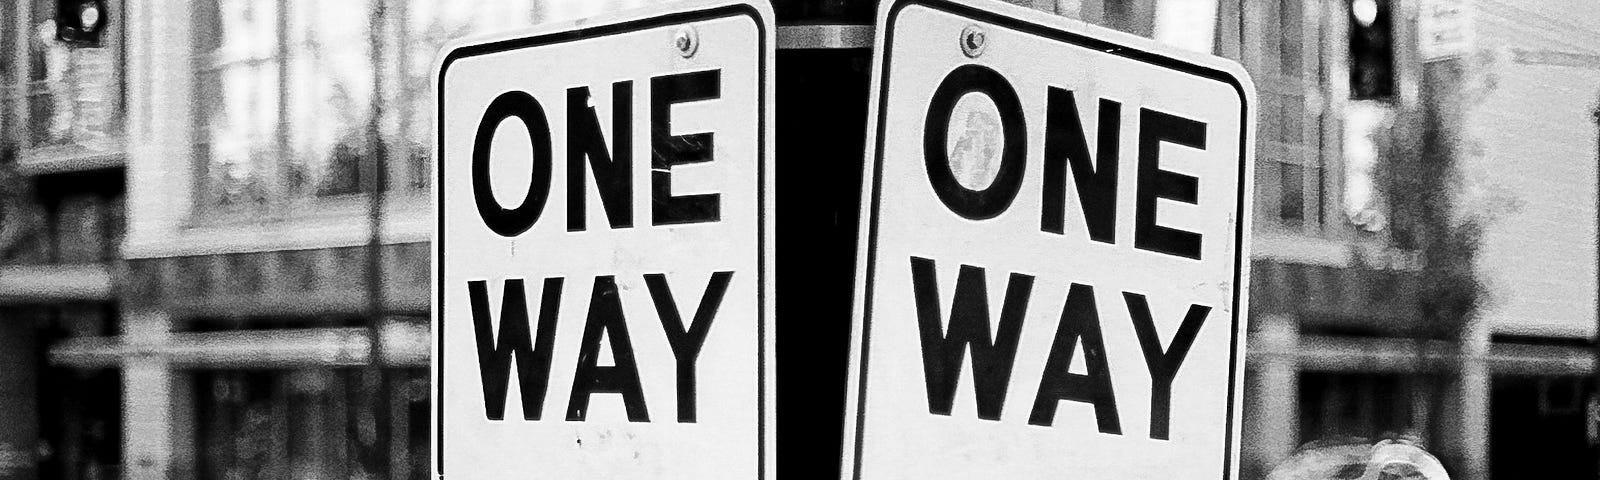 Two “One Way” traffic signs pointing in opposite directions on the corner of a city street.